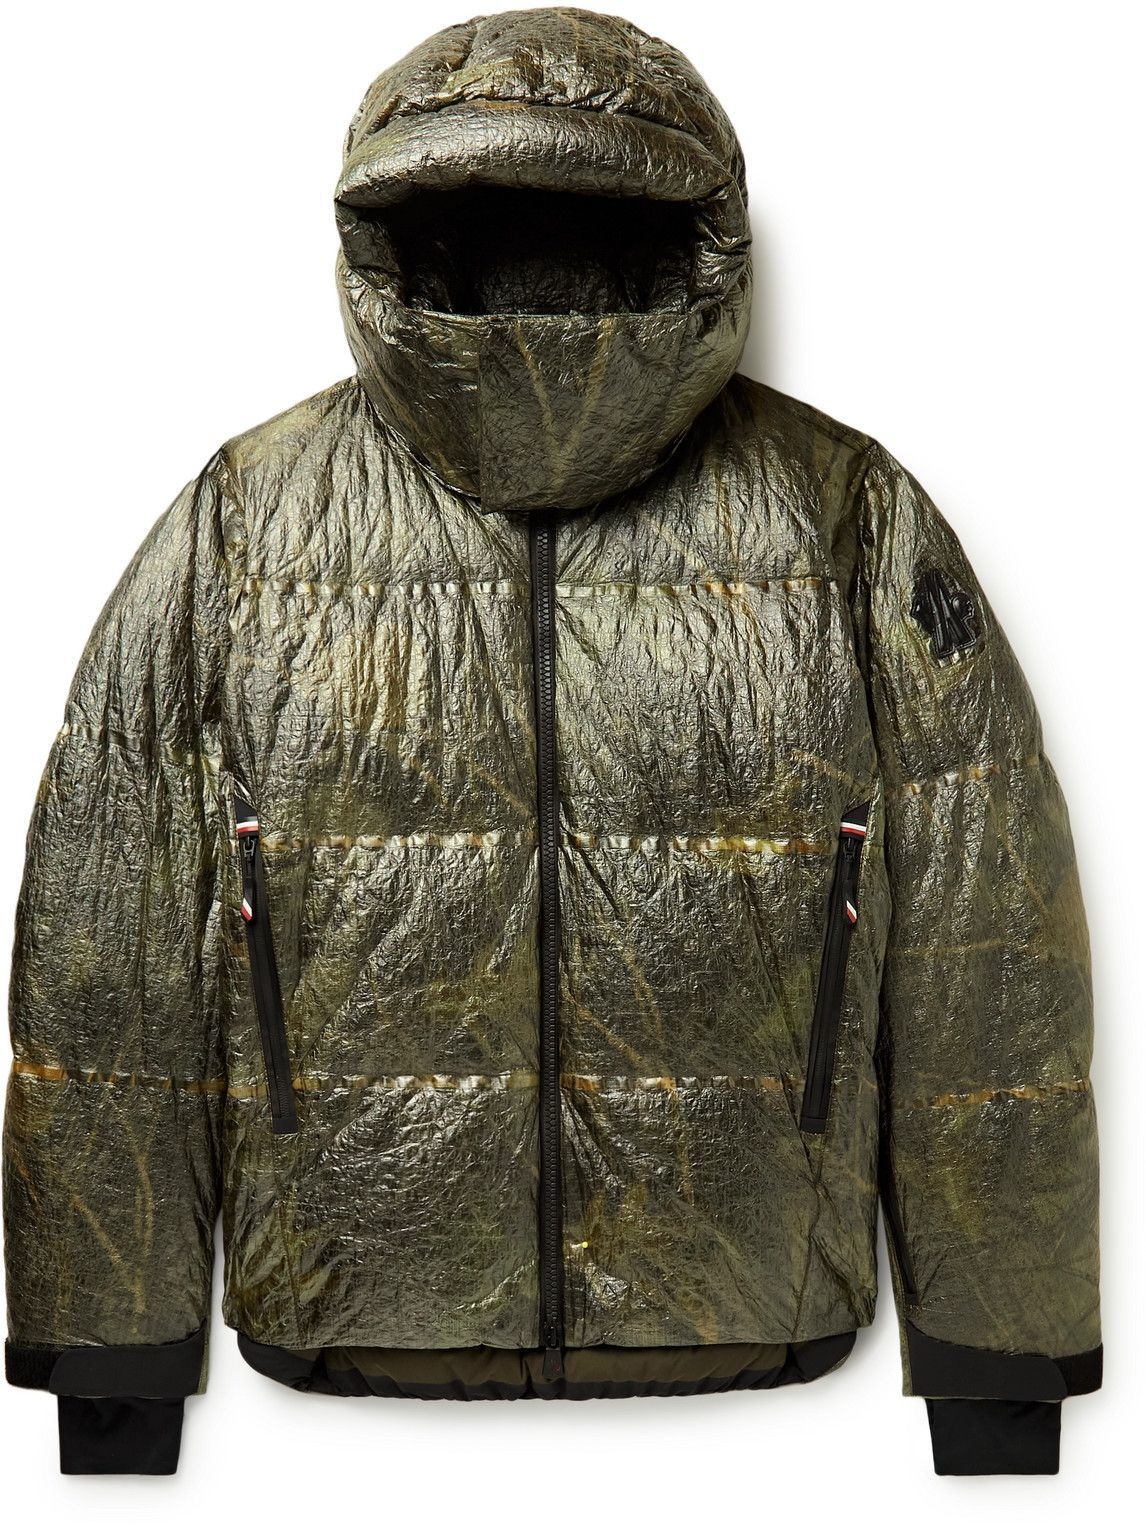 Moncler Grenoble - Darry Printed Quilted Dyneema Crinkled Hooded